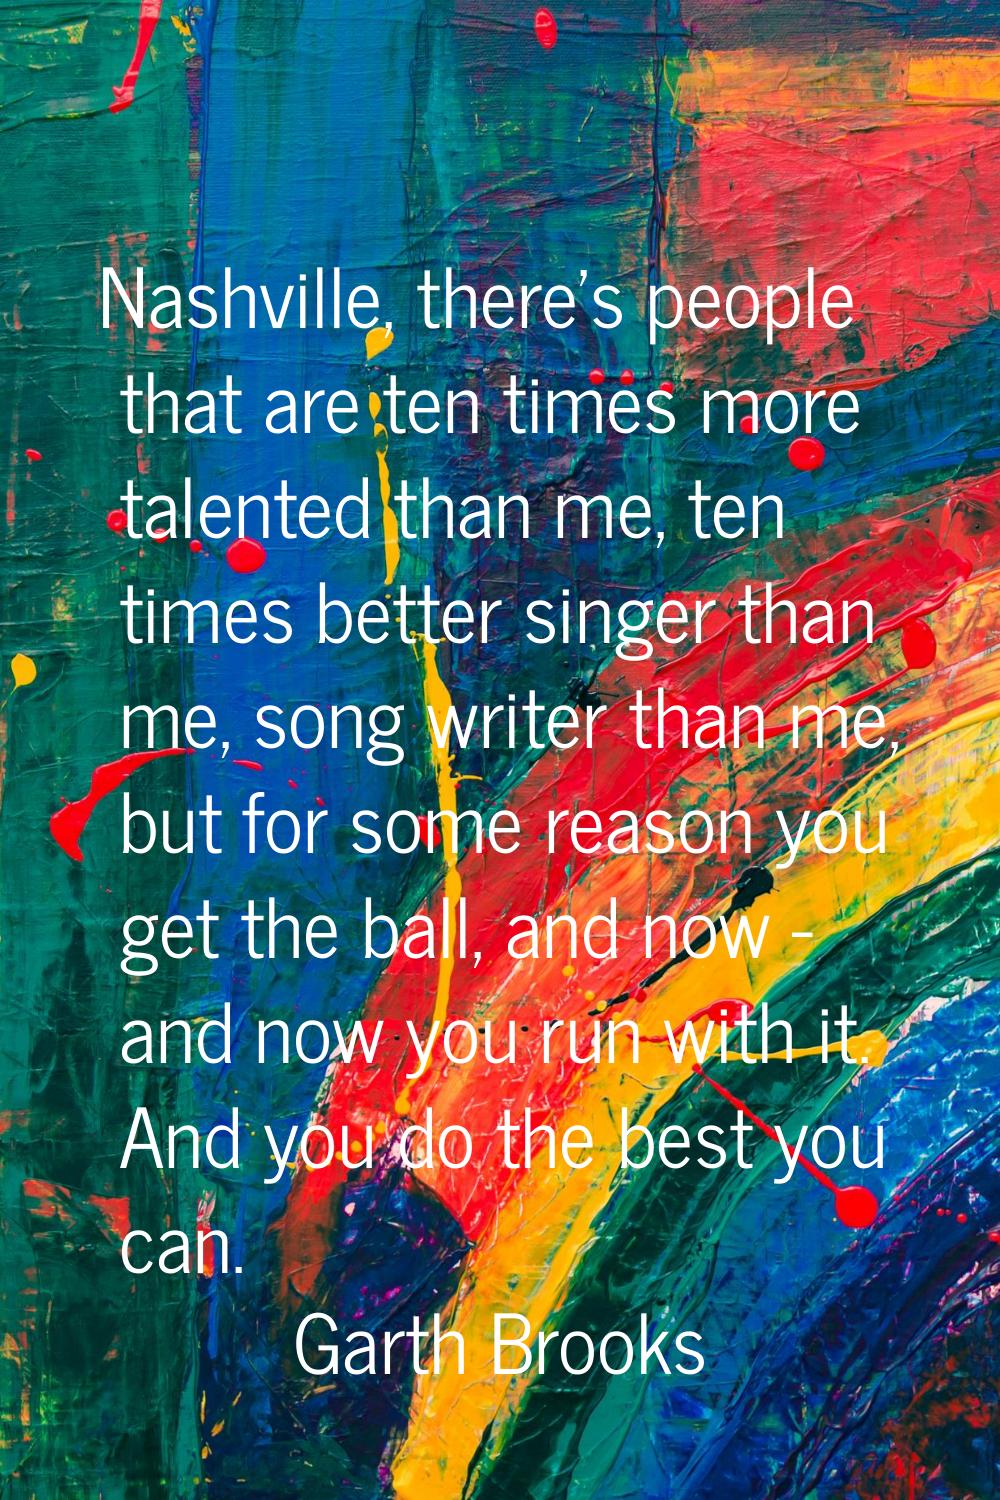 Nashville, there's people that are ten times more talented than me, ten times better singer than me